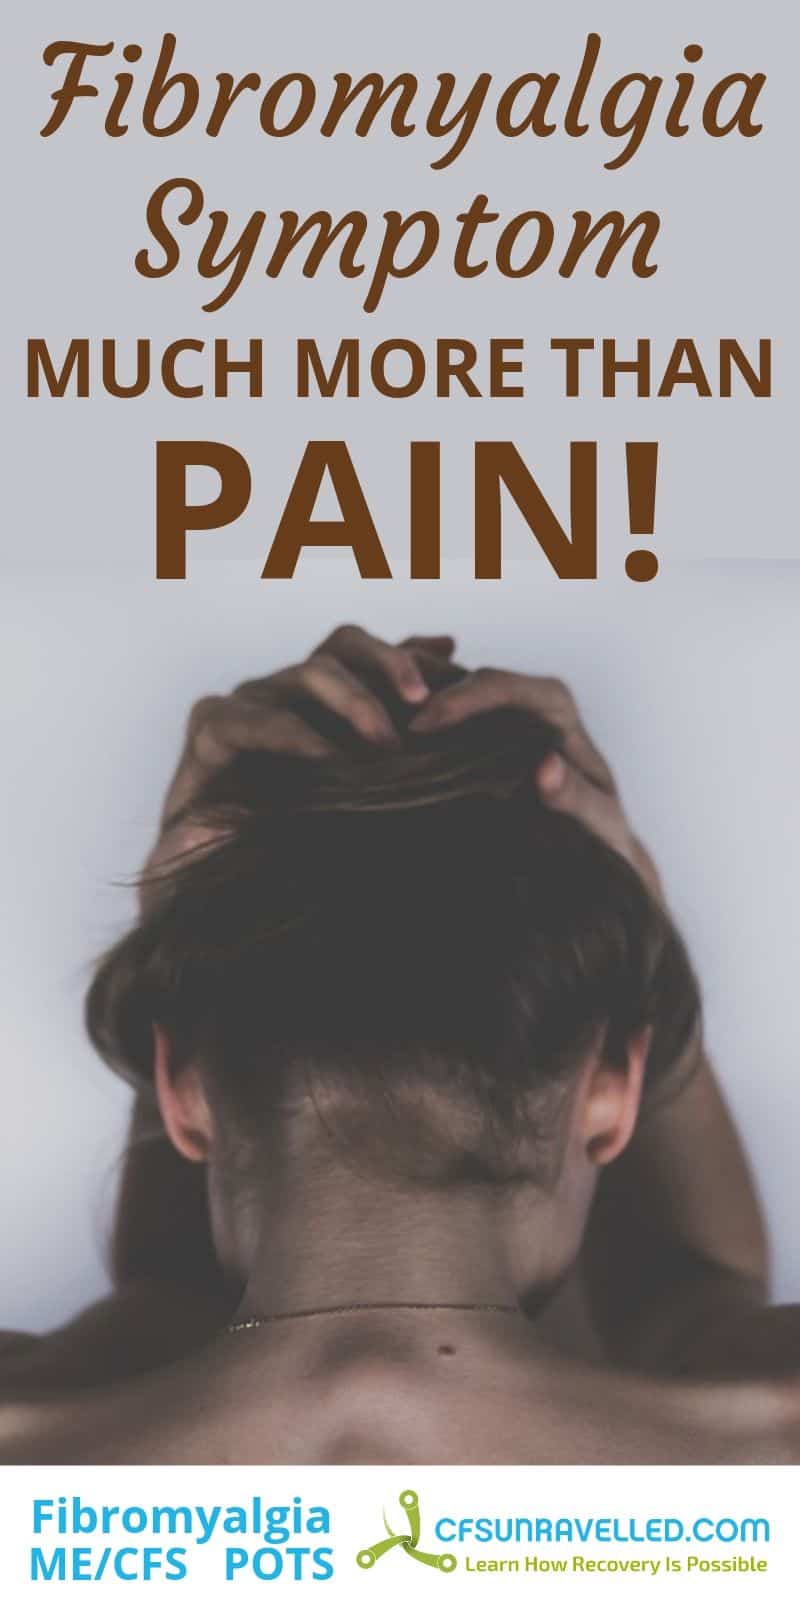 woman from behind holding head with headline about fibromyalgia being more than pain